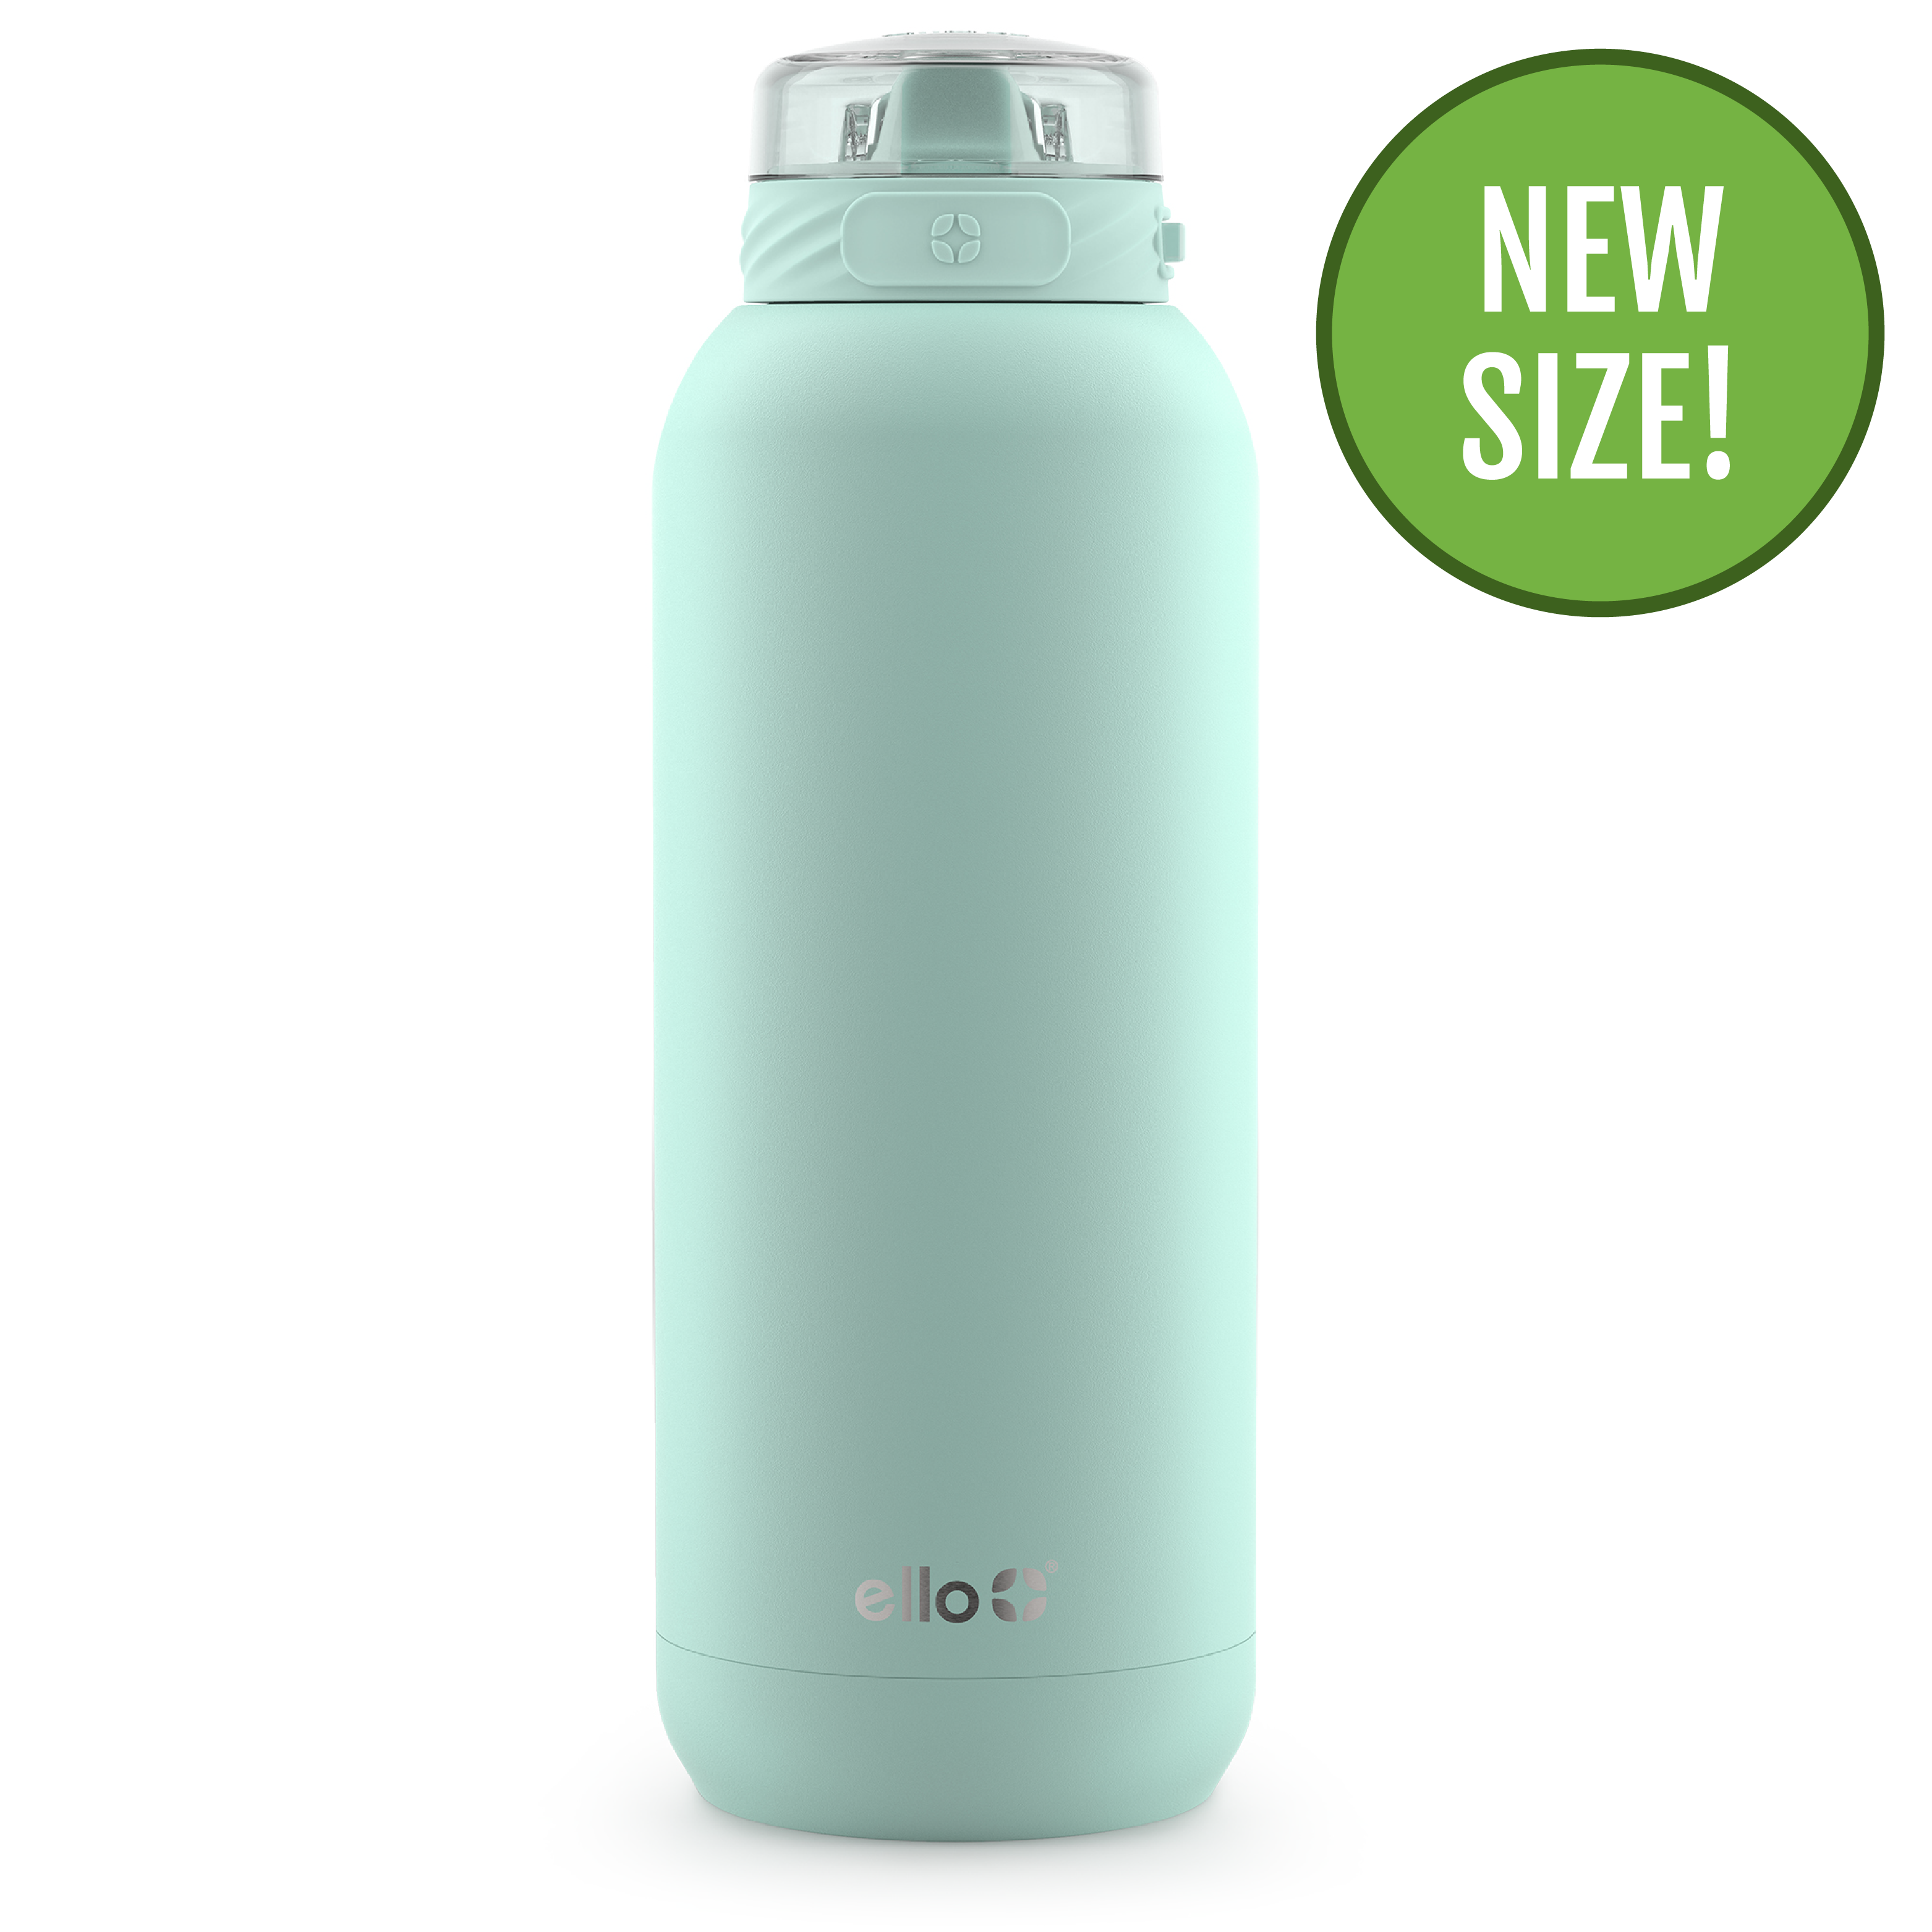 Ello Cooper Water Bottle 22oz Vacuum Insulated Stainless Steel Teal New